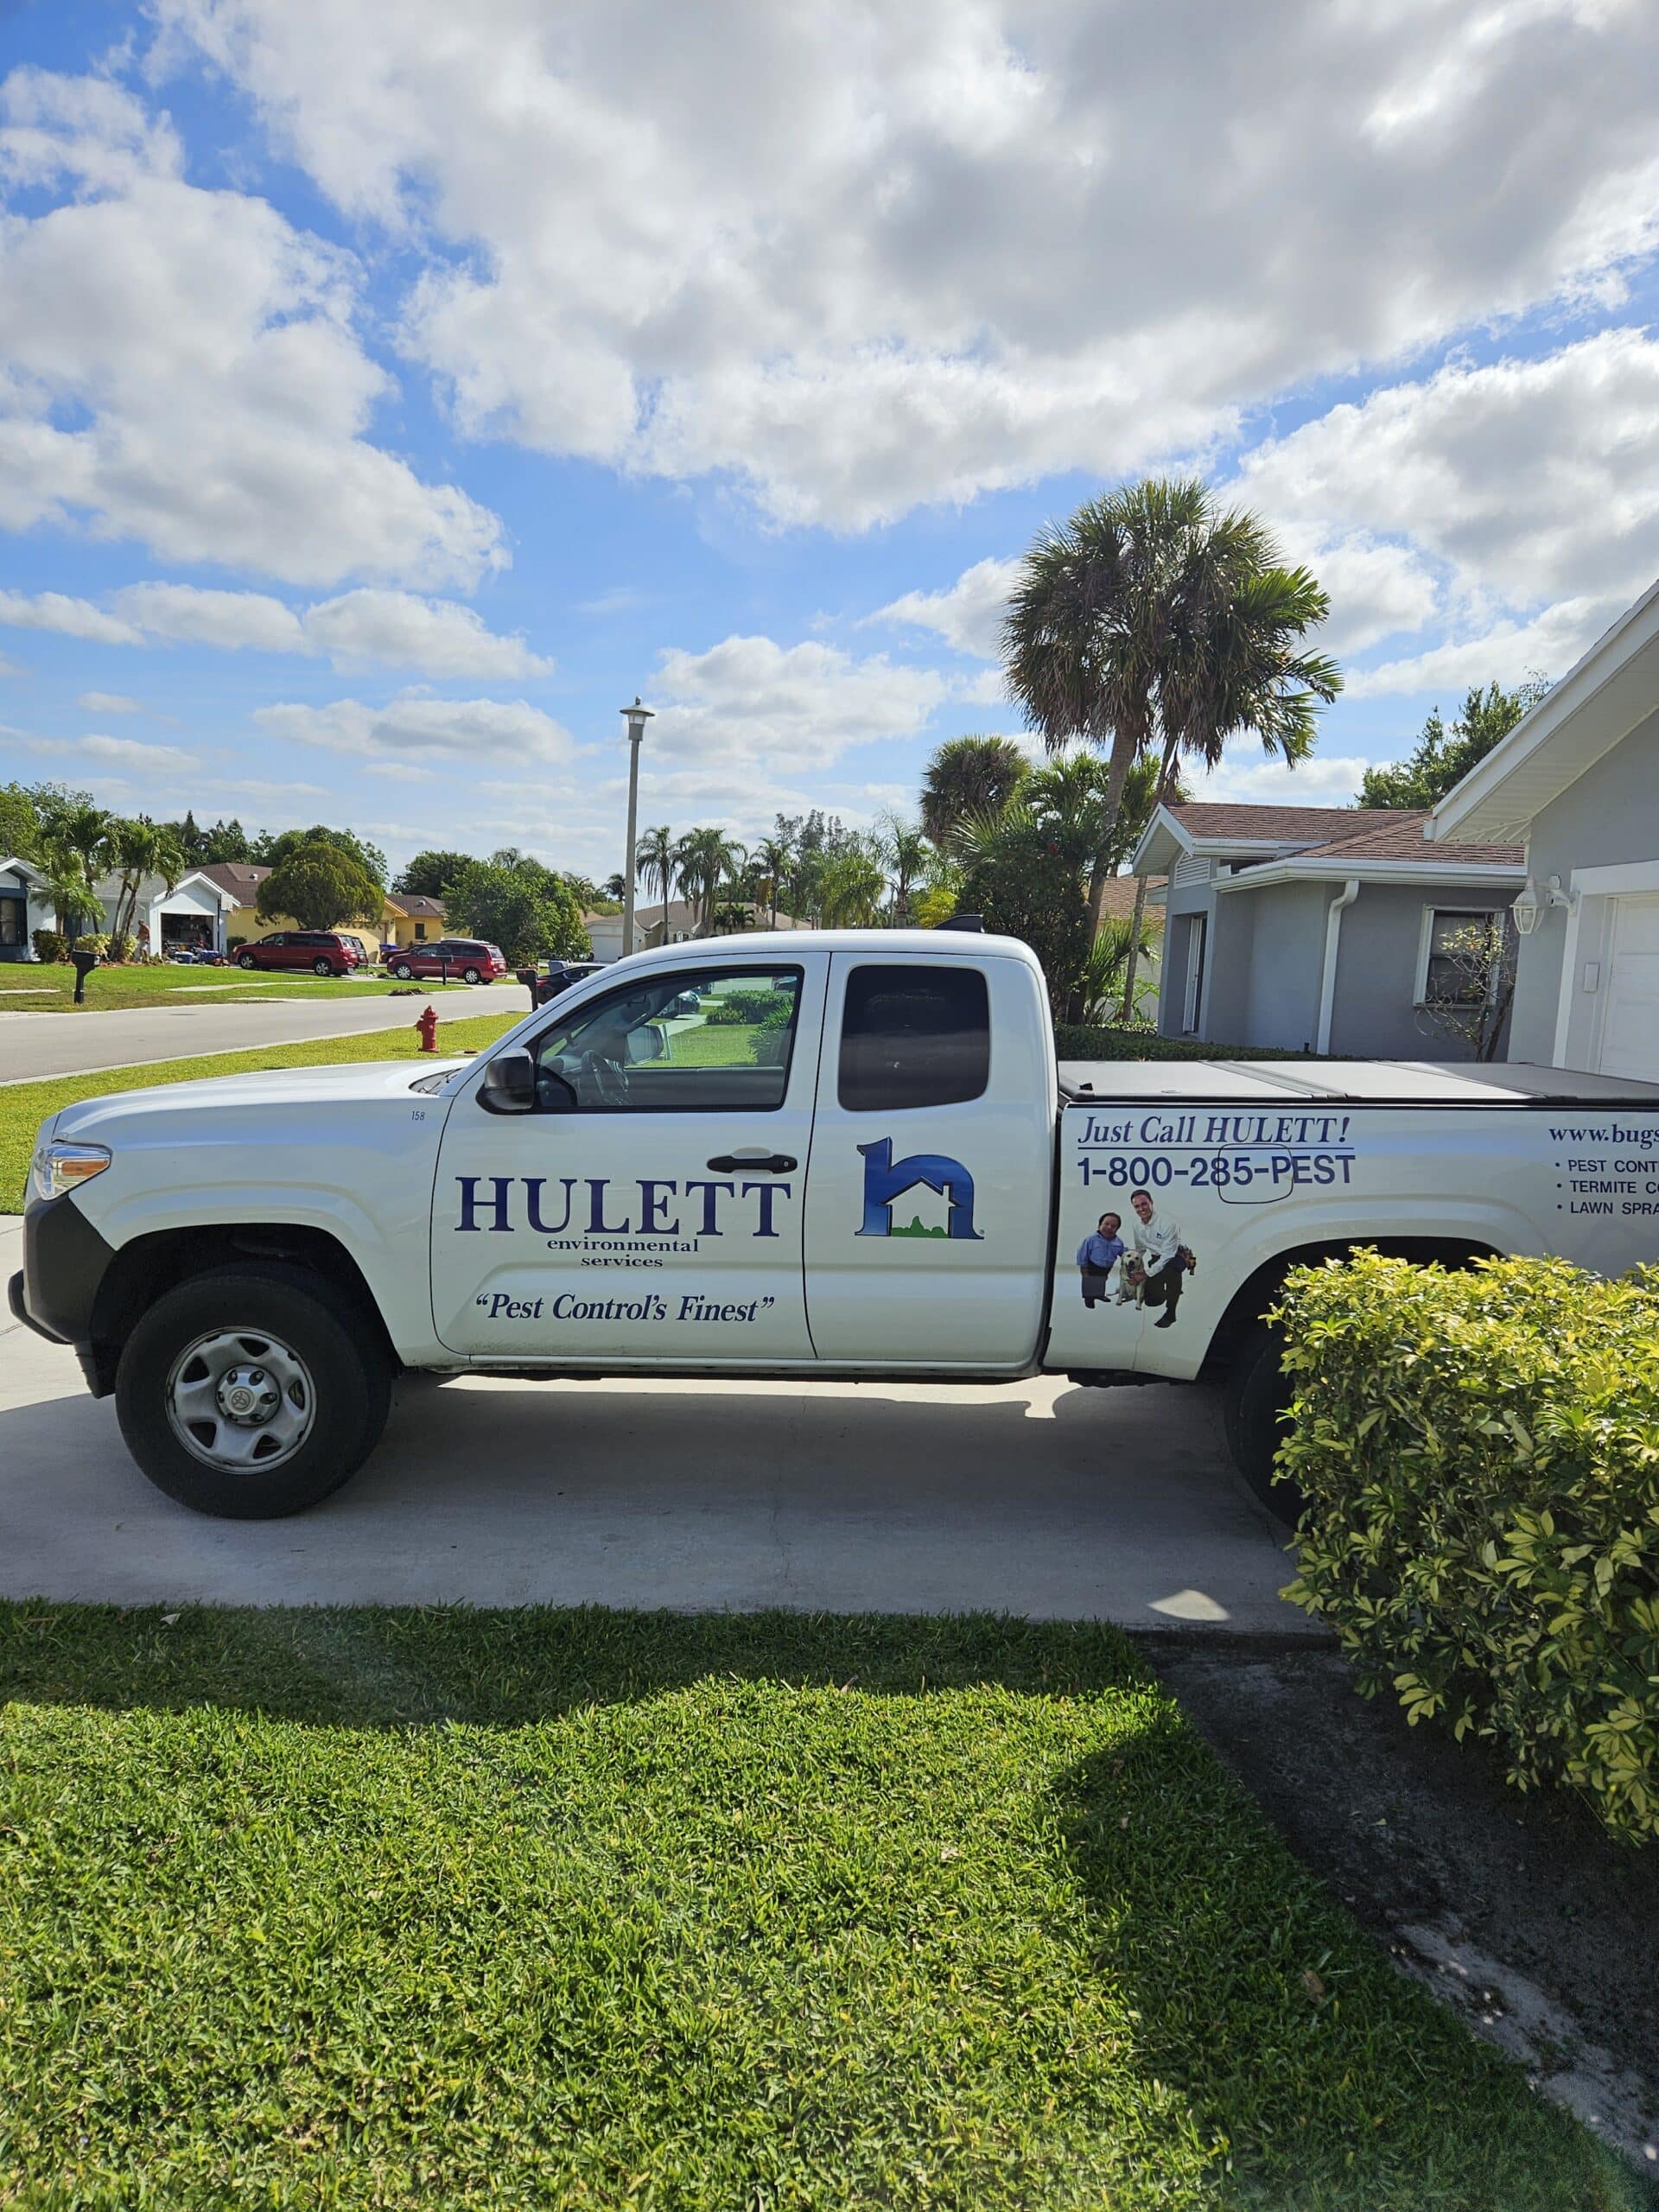 Hulett truck ready to provide pest control service at a home in West Palm Beach, Florida.